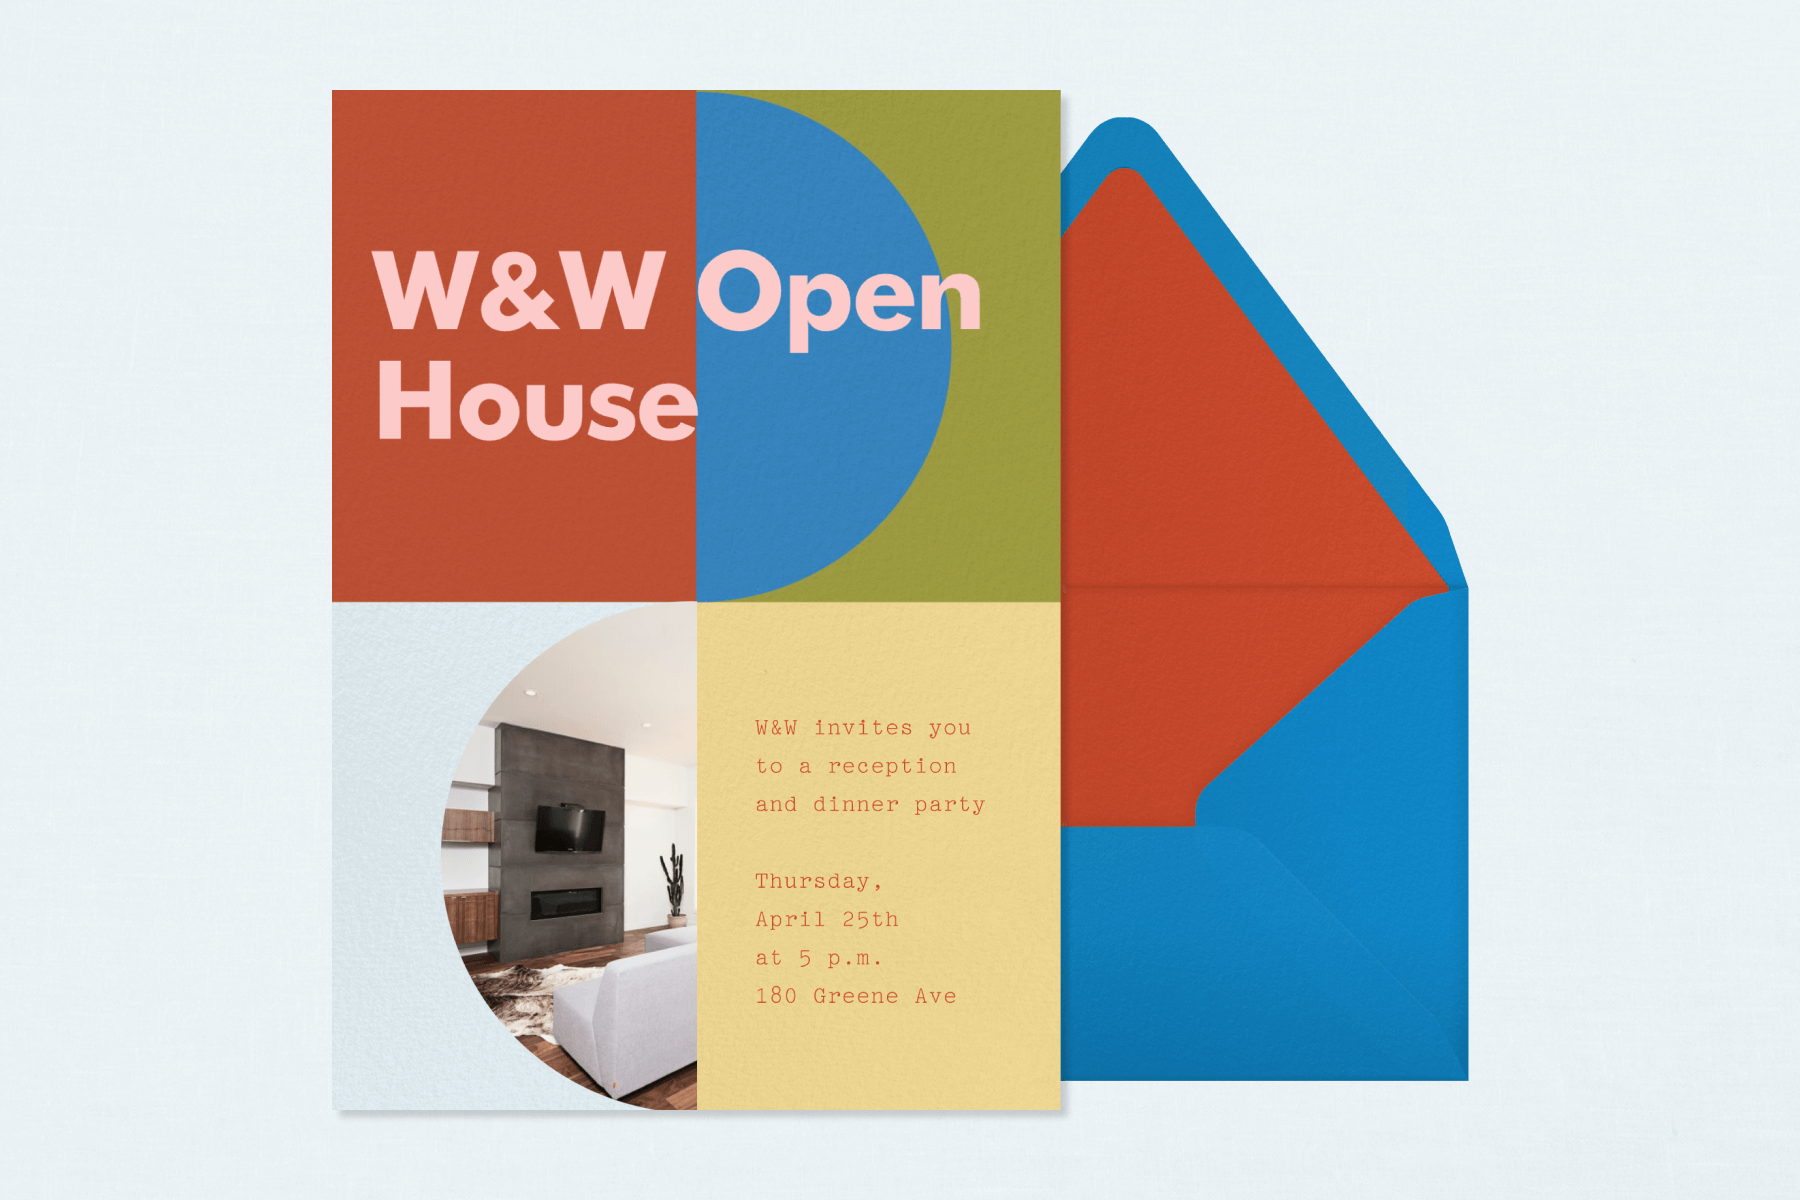 An online invitation with bold, geometric shapes in red, blue, green, and yellow, plus a photo of a living room fireplace in a semi-circle below the words “W&W Open House” sits beside a blue envelope with a red liner.